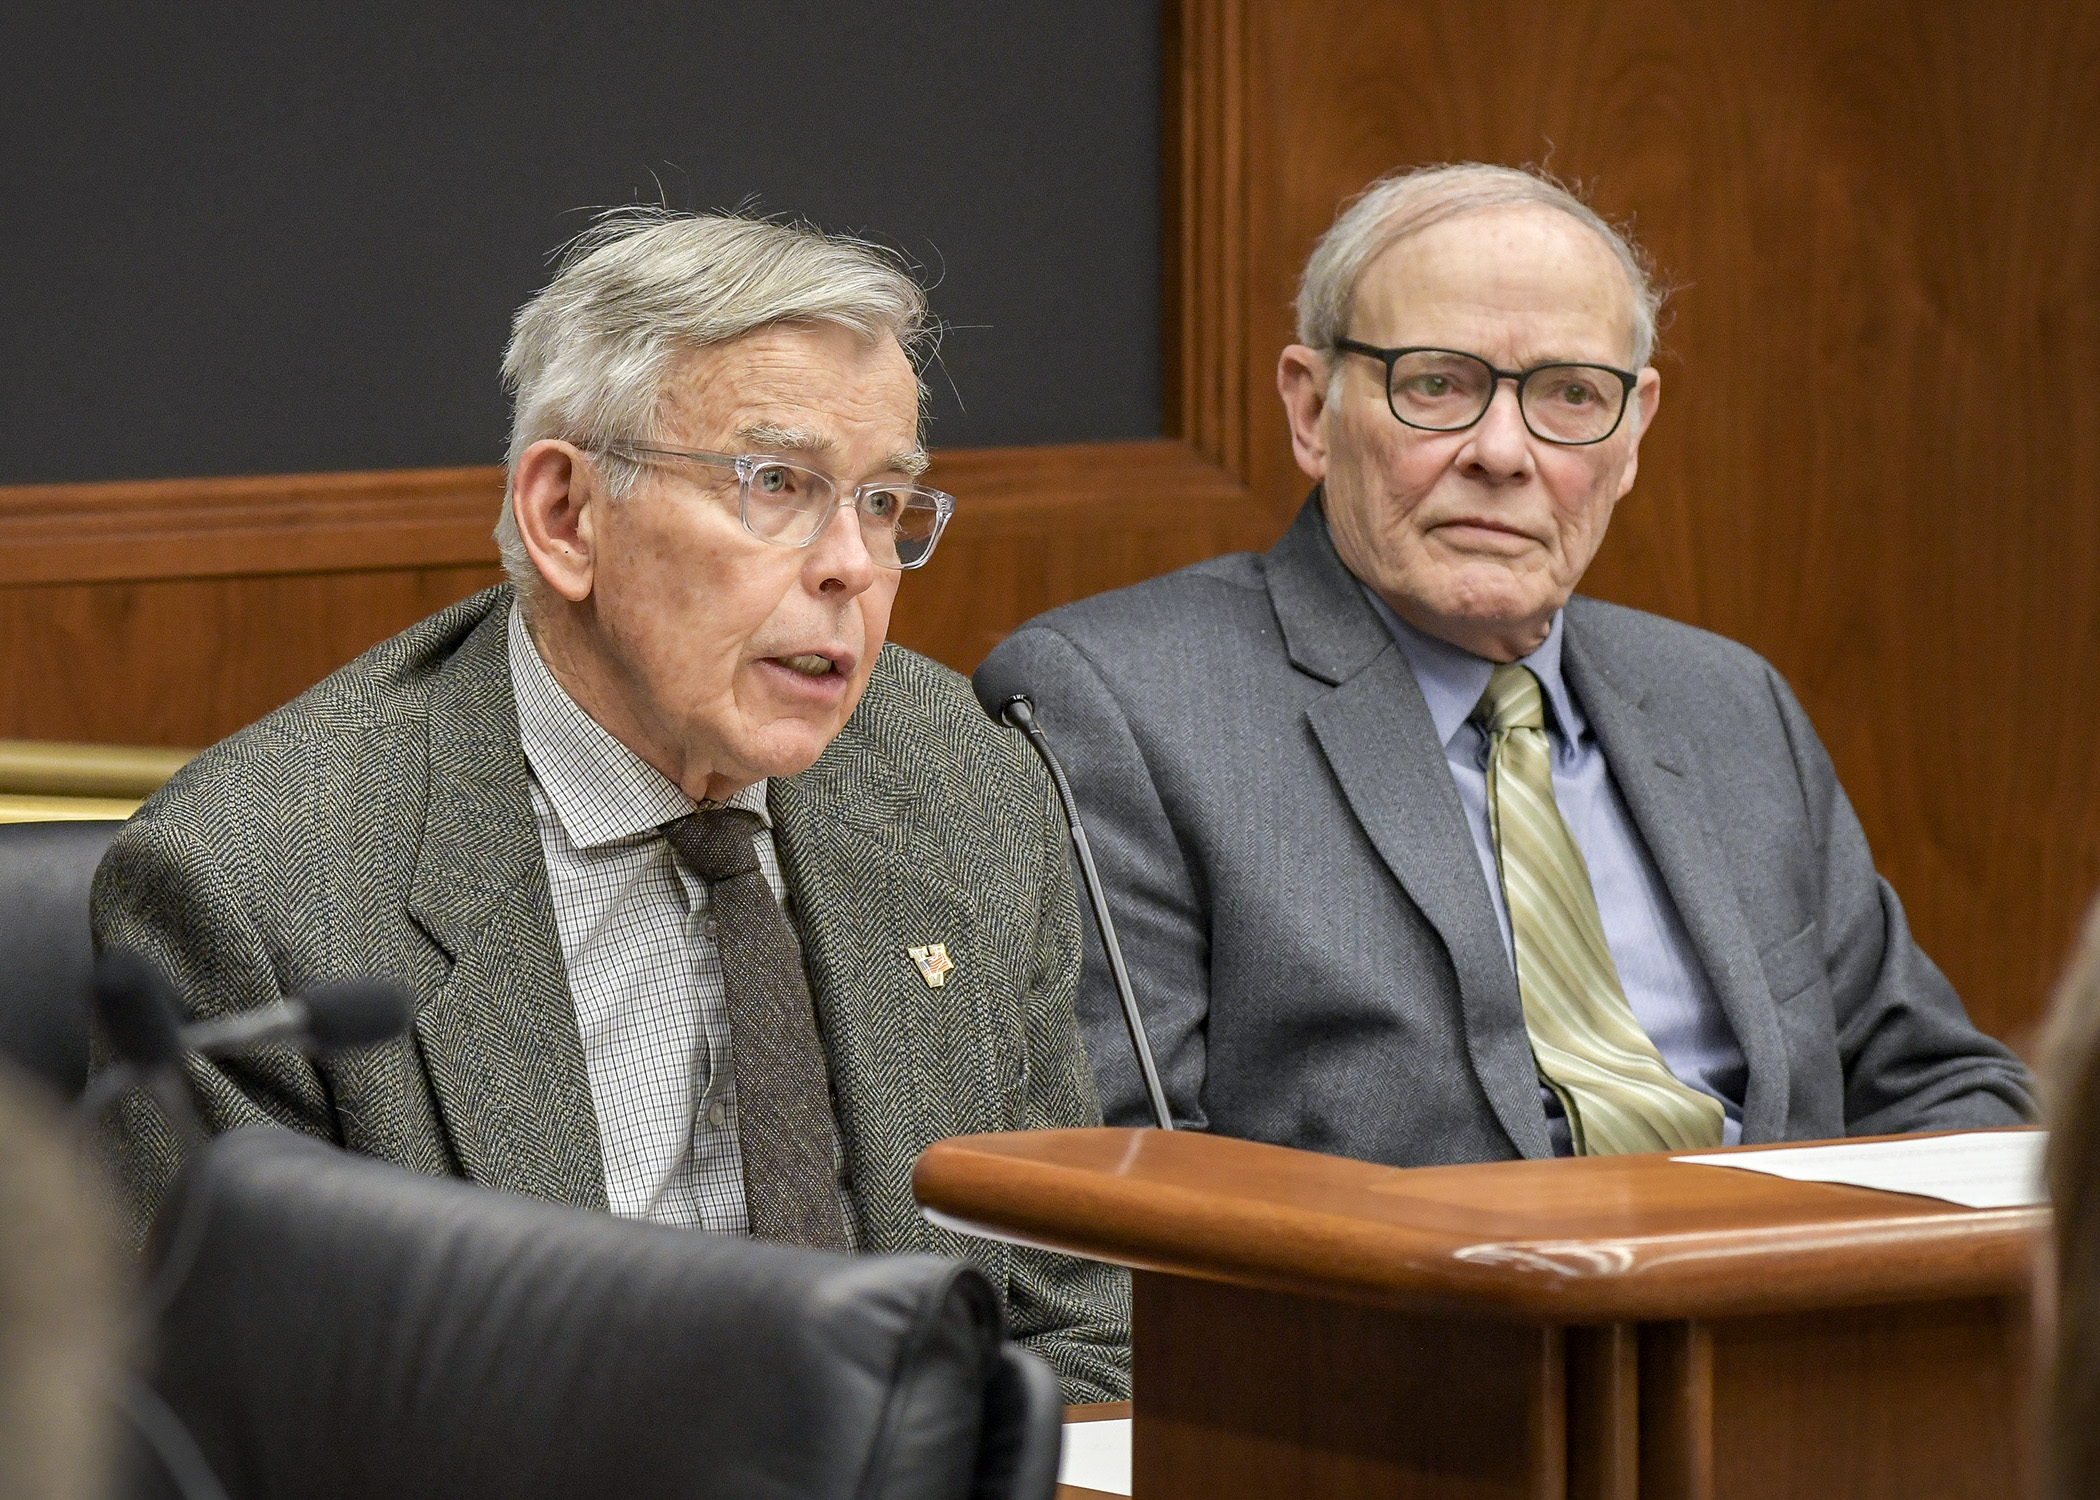 John Kraemer, left, chair of the Minnesota Medal of Honor Memorial, and Lee Egerstrom, co-coordinator of the Minnesota chapter of State Funeral for World War II Veterans, testify before a House committee Feb. 14. Photo by Andrew VonBank